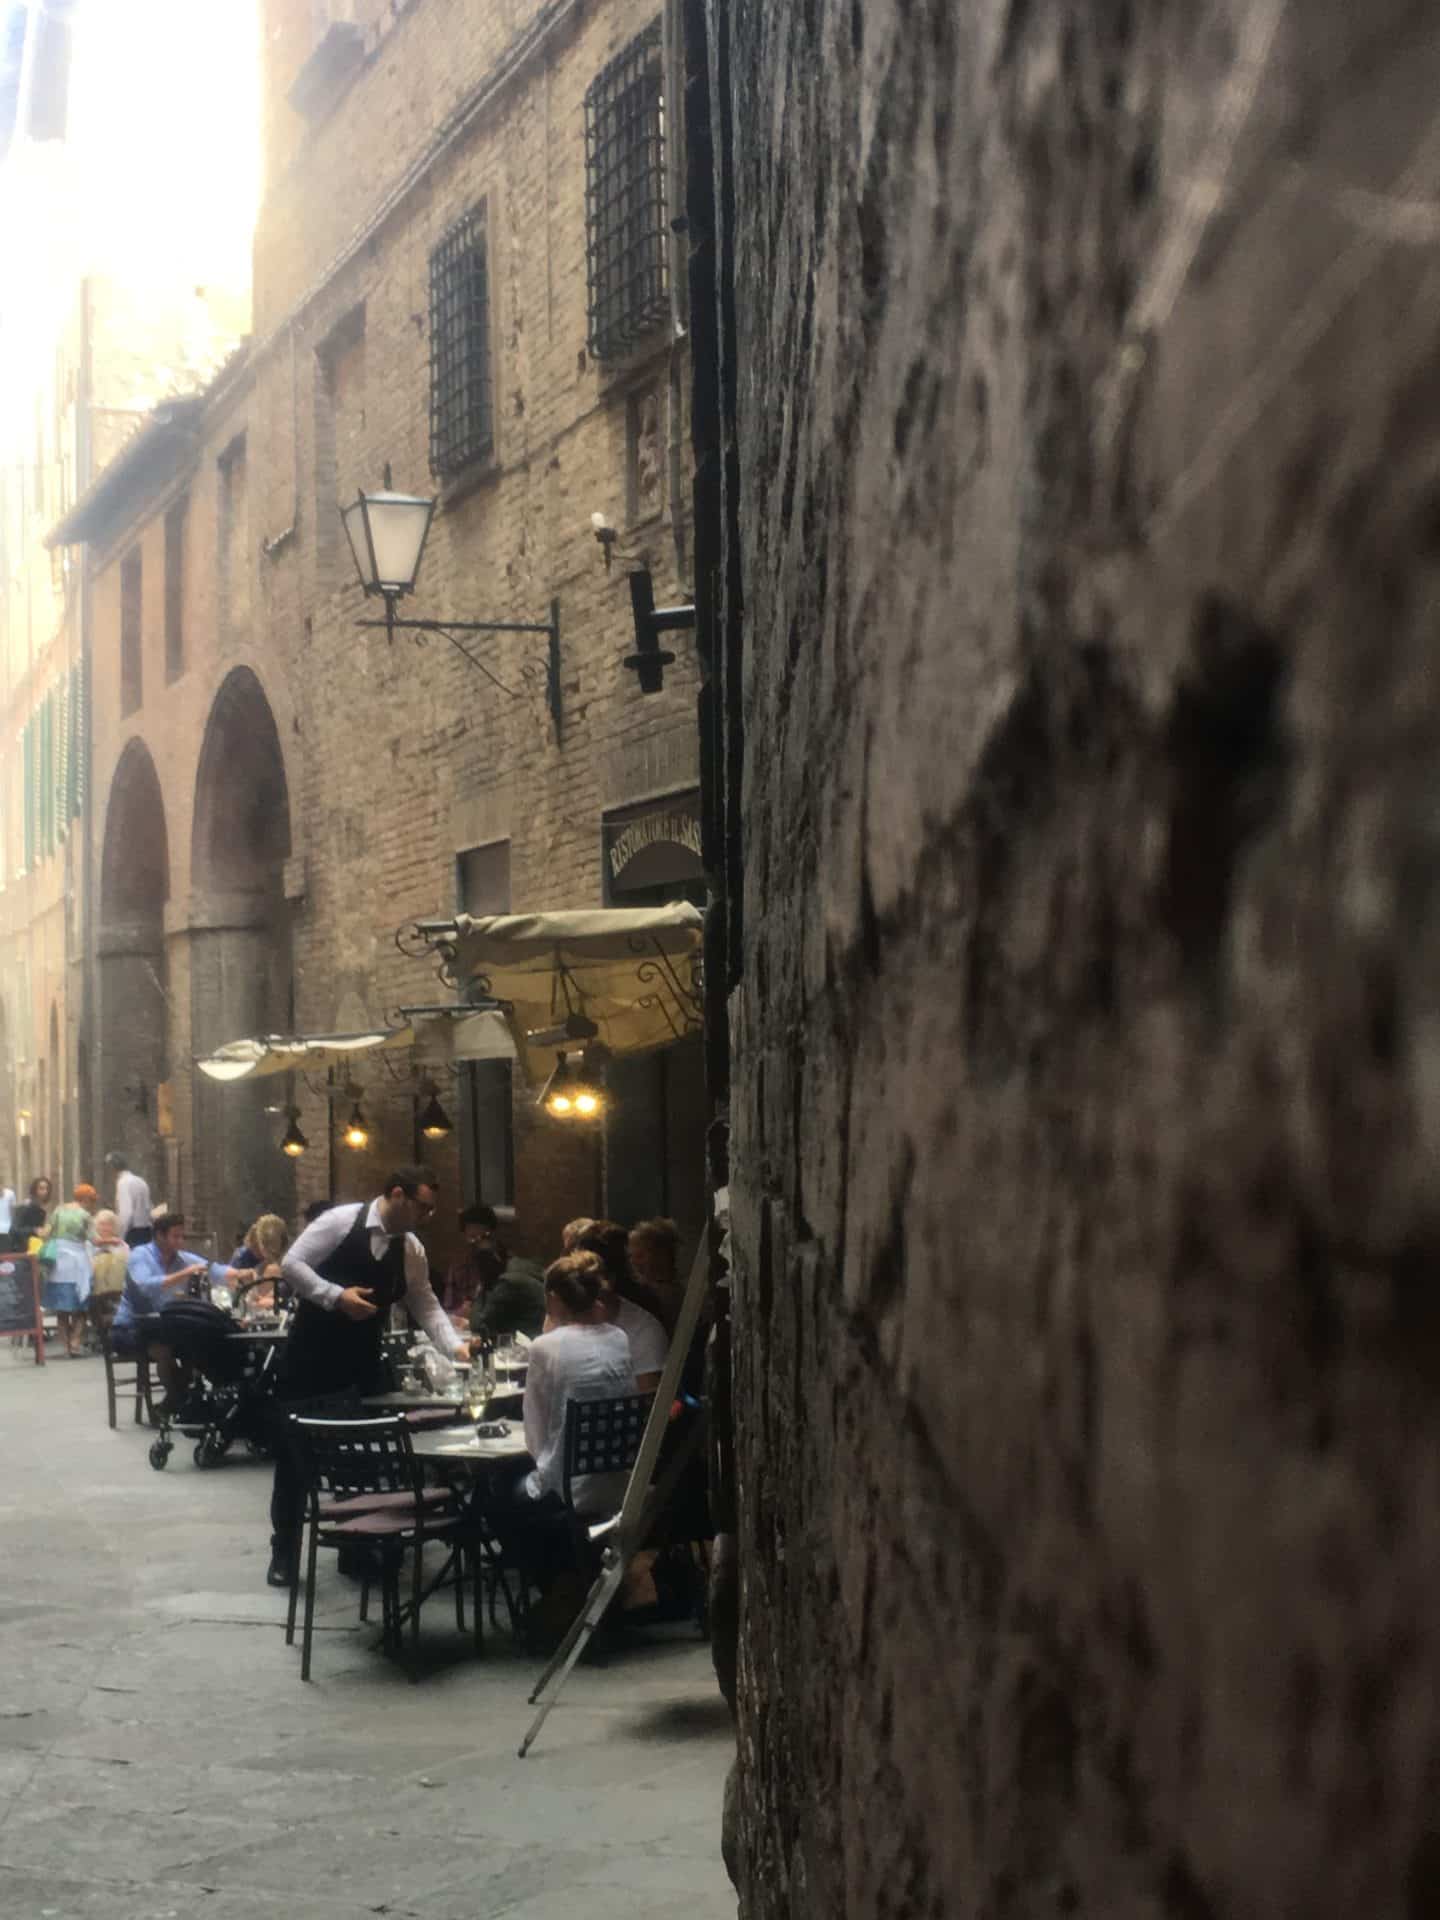 Tuscany's Medieval Towns, Siena